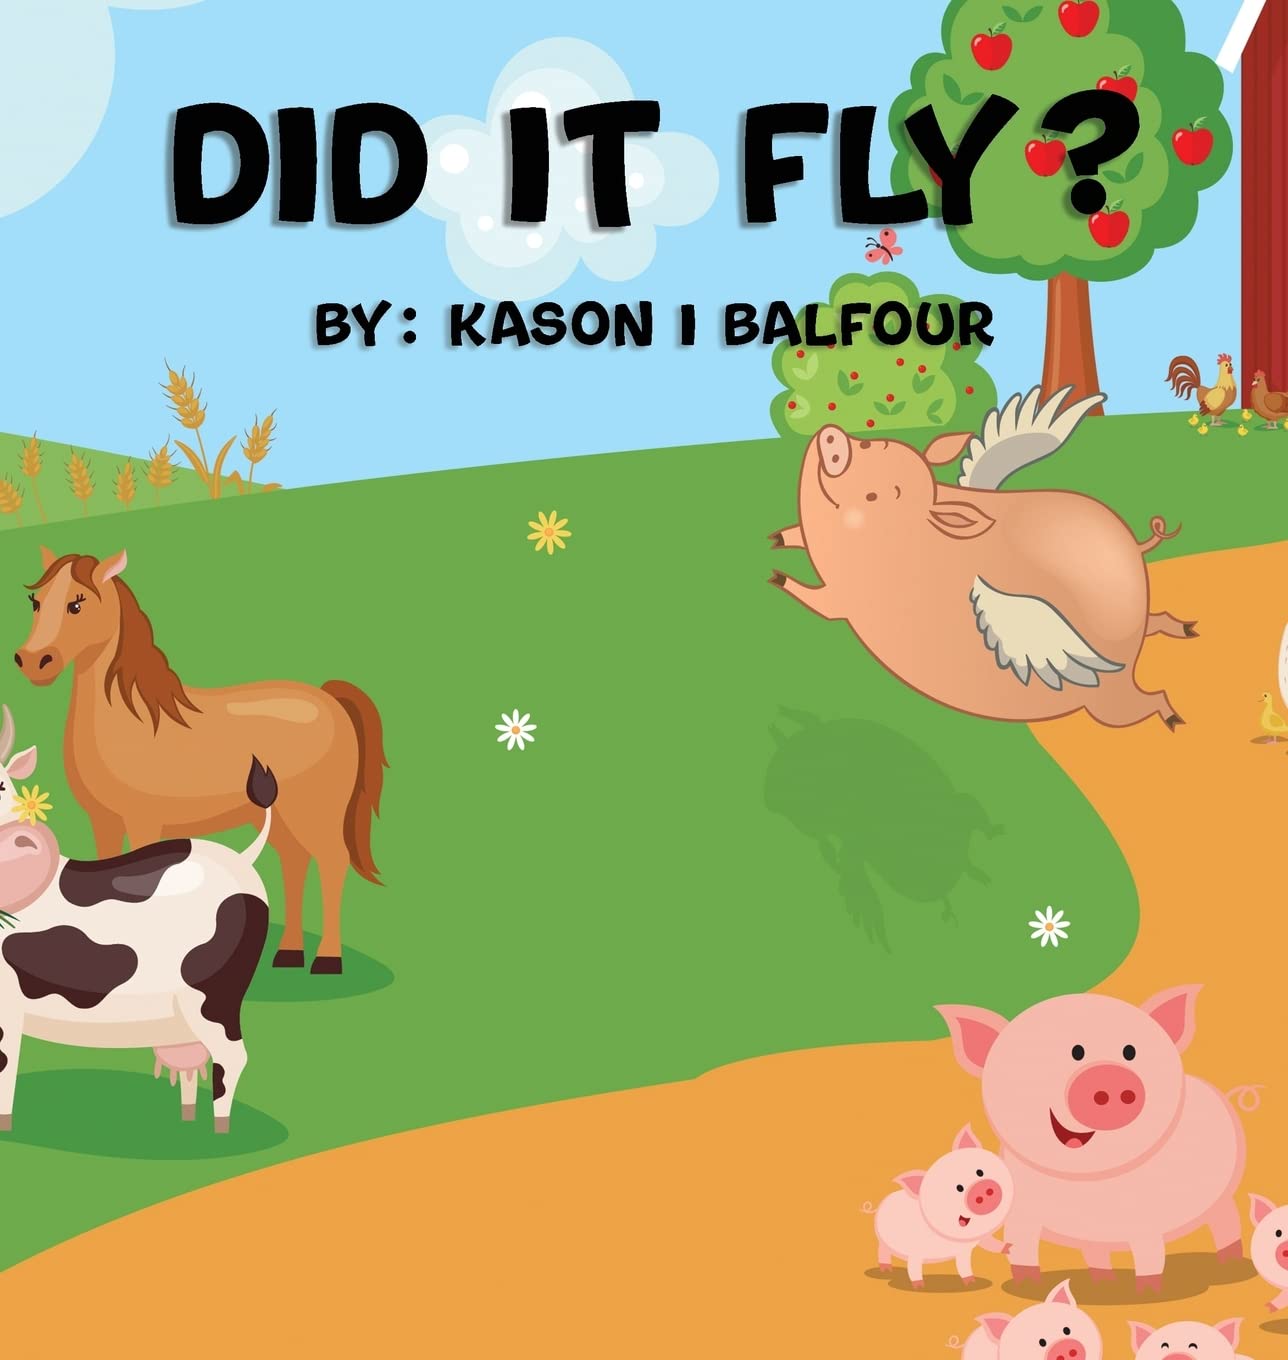 "Did It Fly" Tells A Heart-Warming Story of an Adorable Pig, Jackson